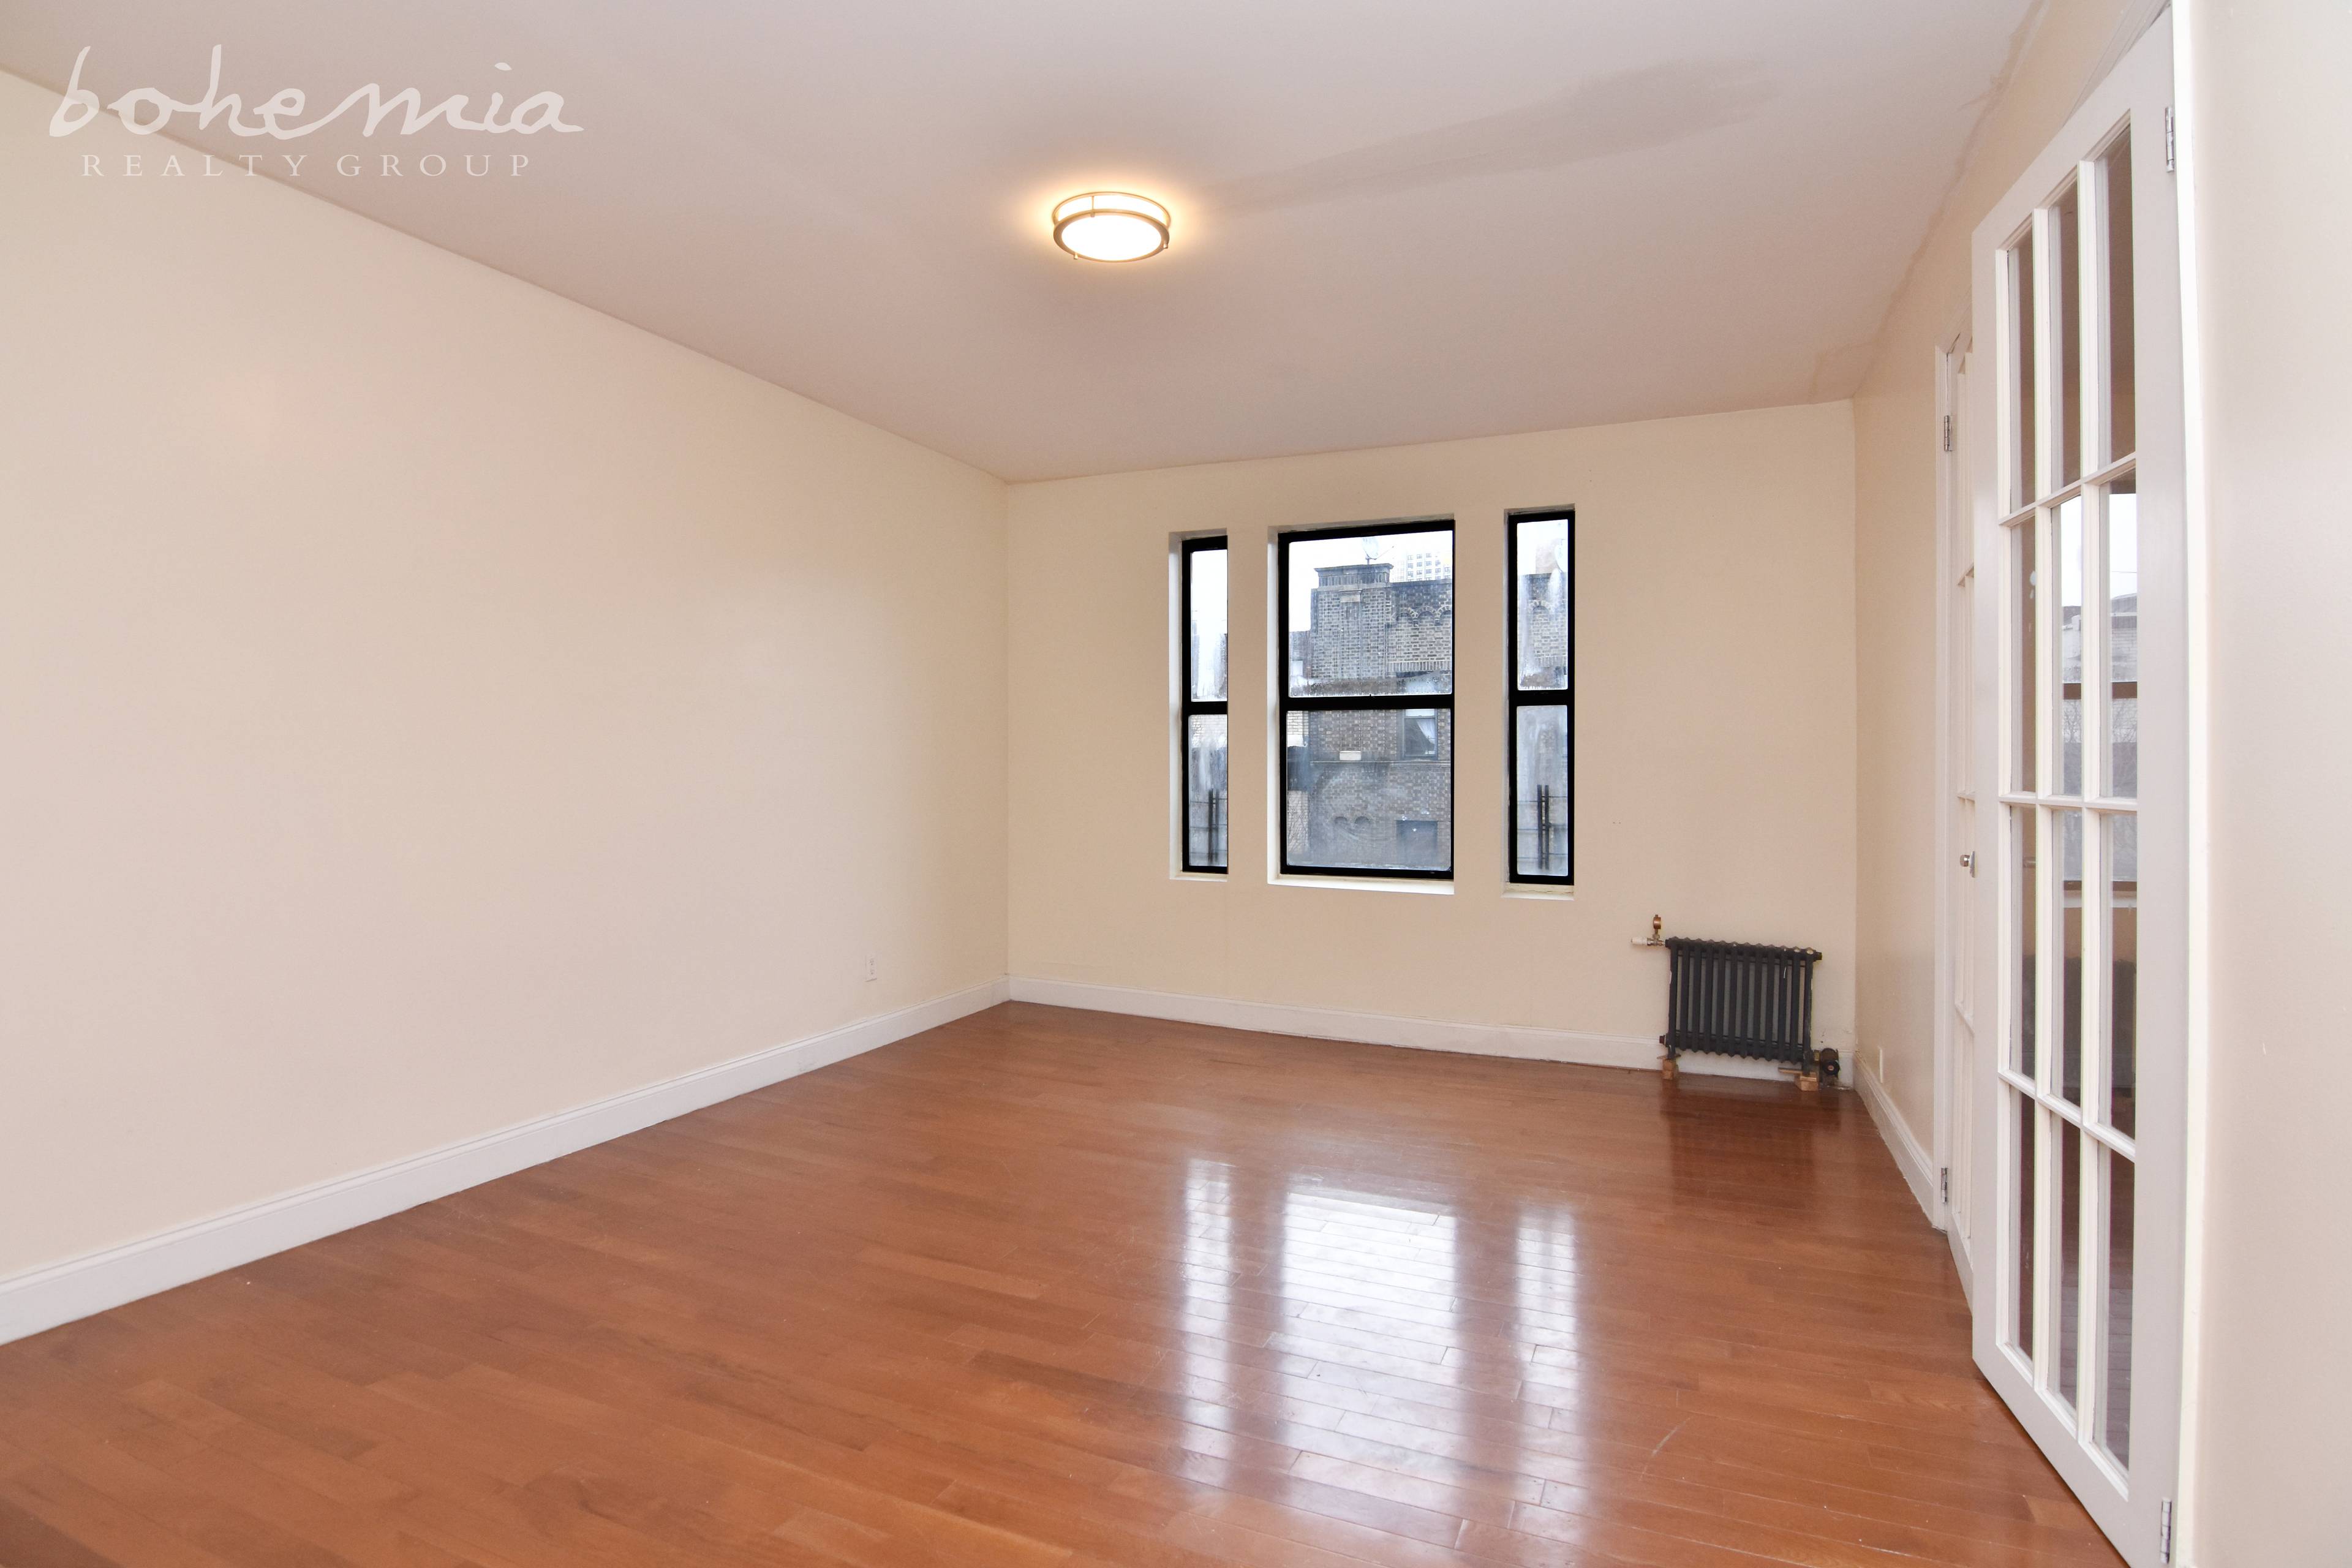 Renovated Washington Heights 3BR Convertible 4BR Featuring Hardwood Floors, SS Appliances, and Dishwasher.